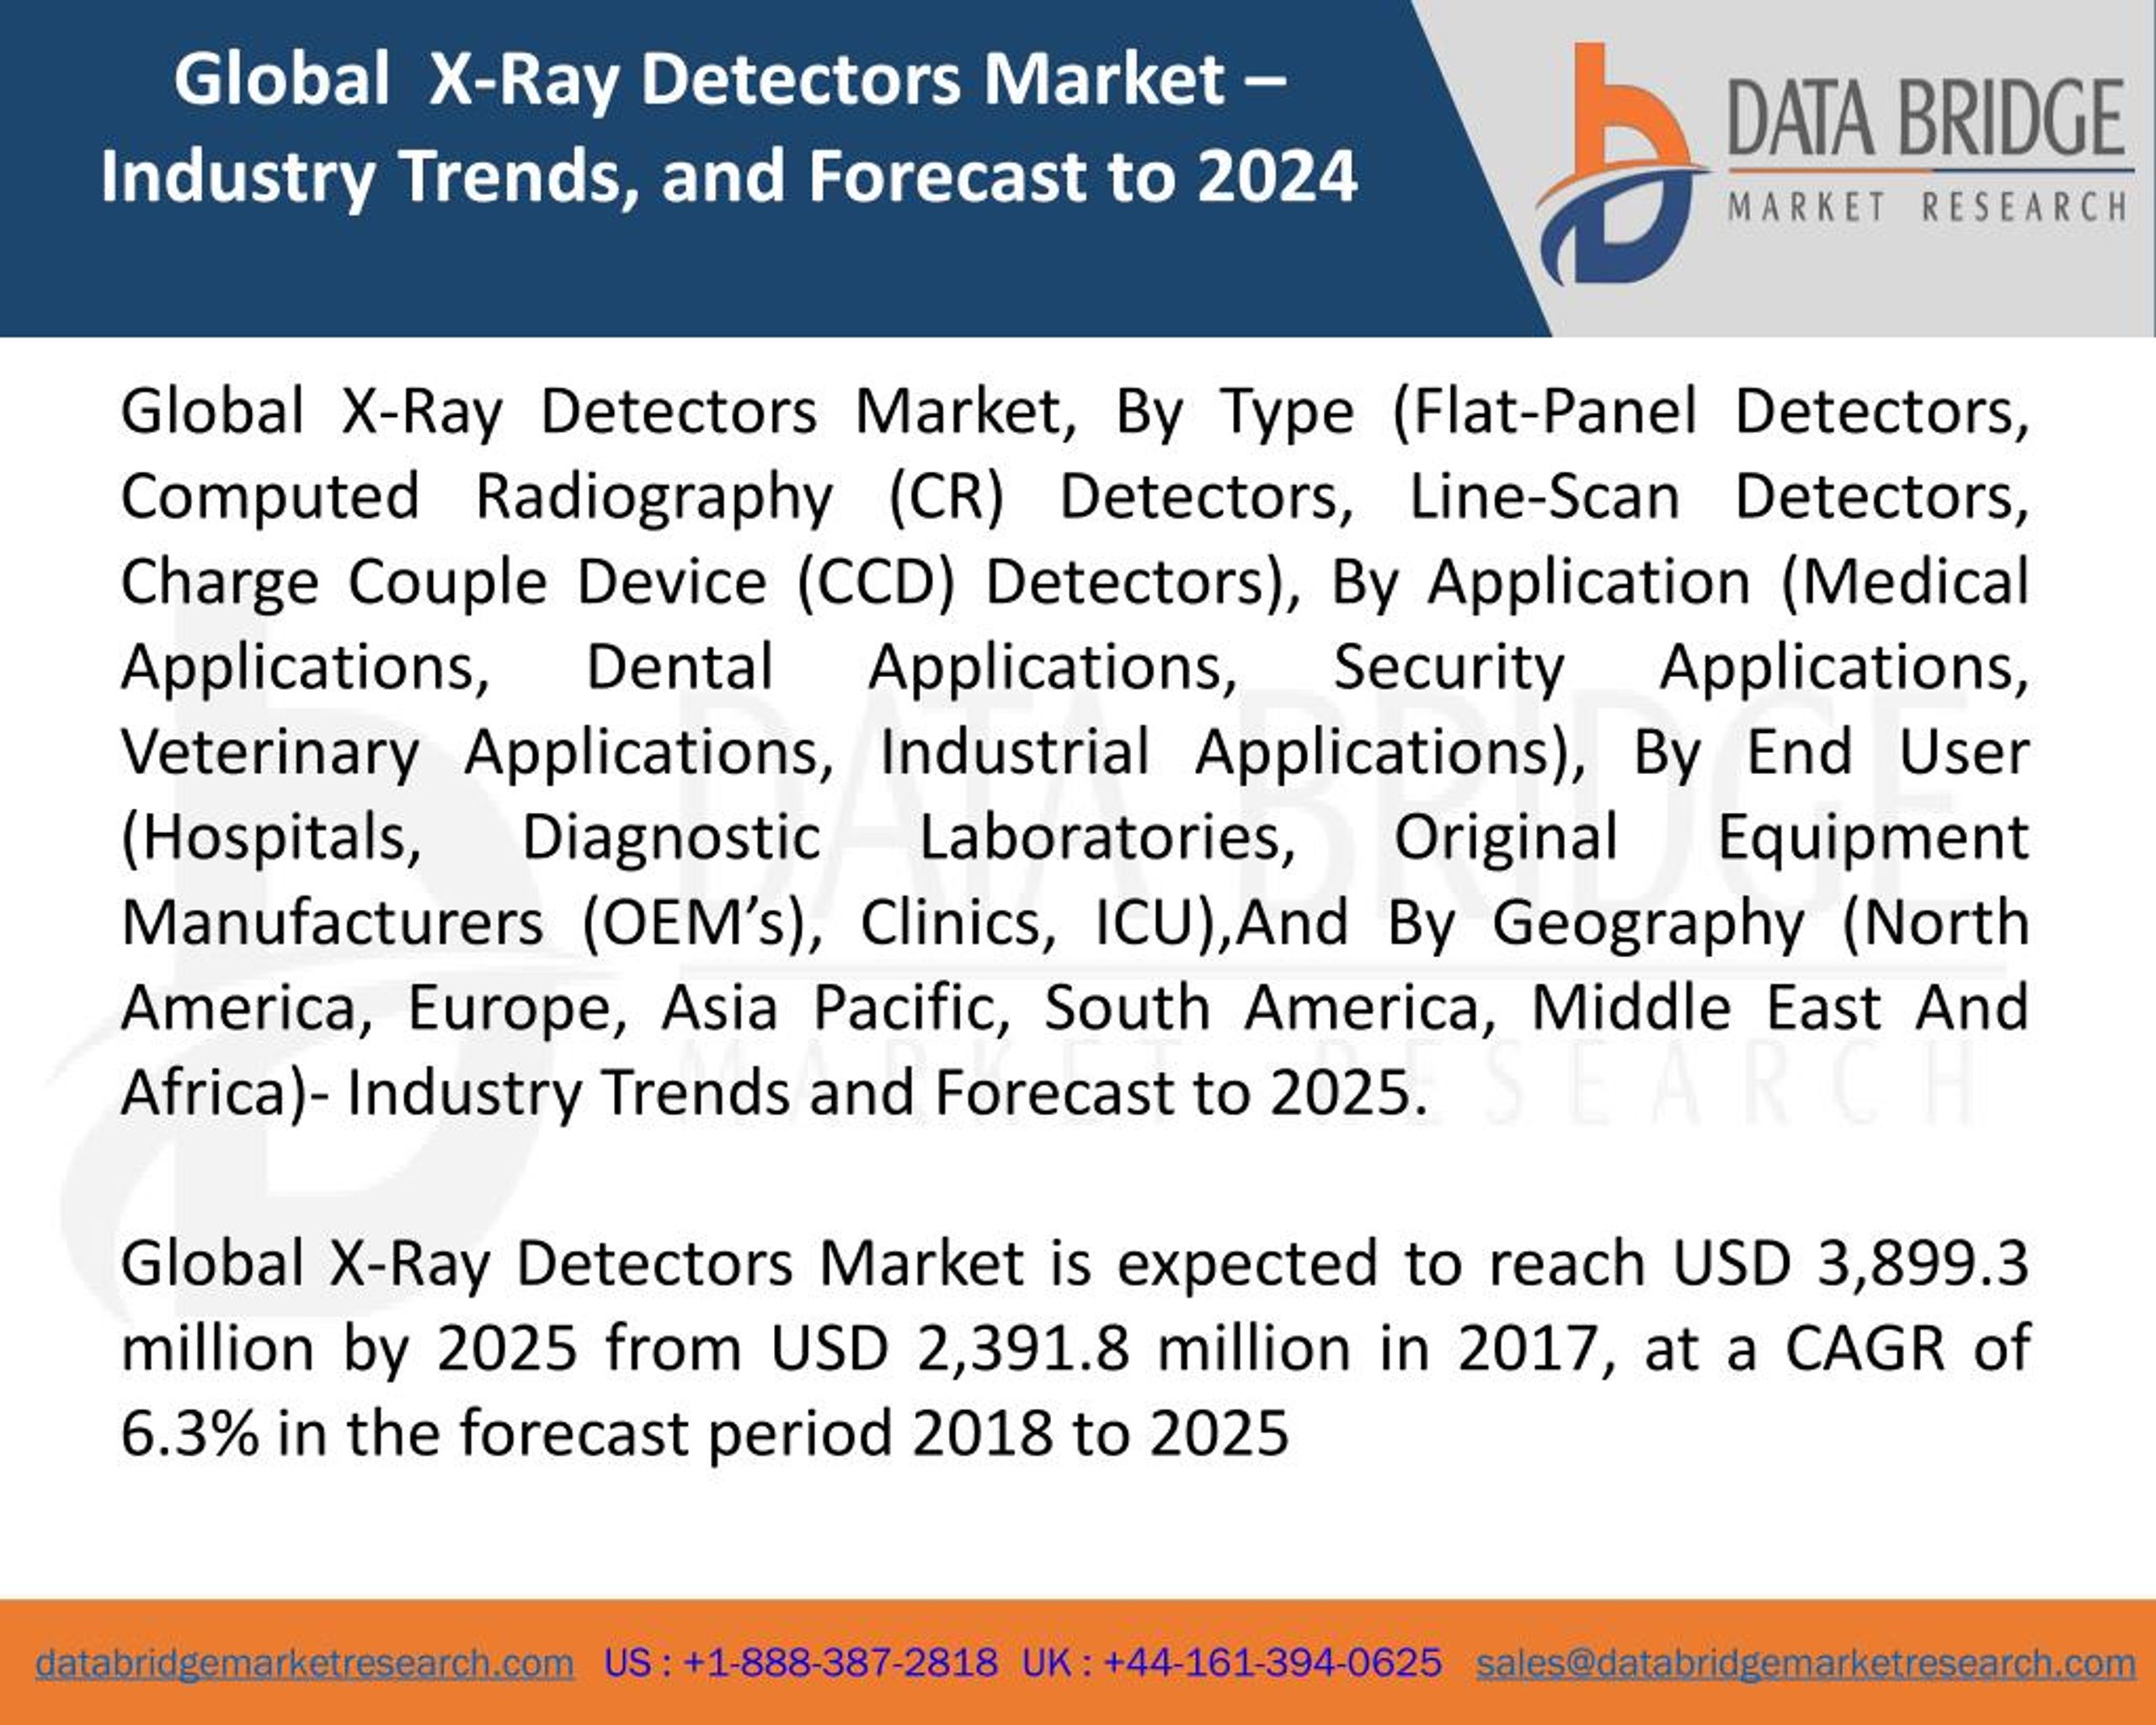 Ppt Global X Ray Detectors Market A Industry Trends And Forecast To 25 Powerpoint Presentation Id